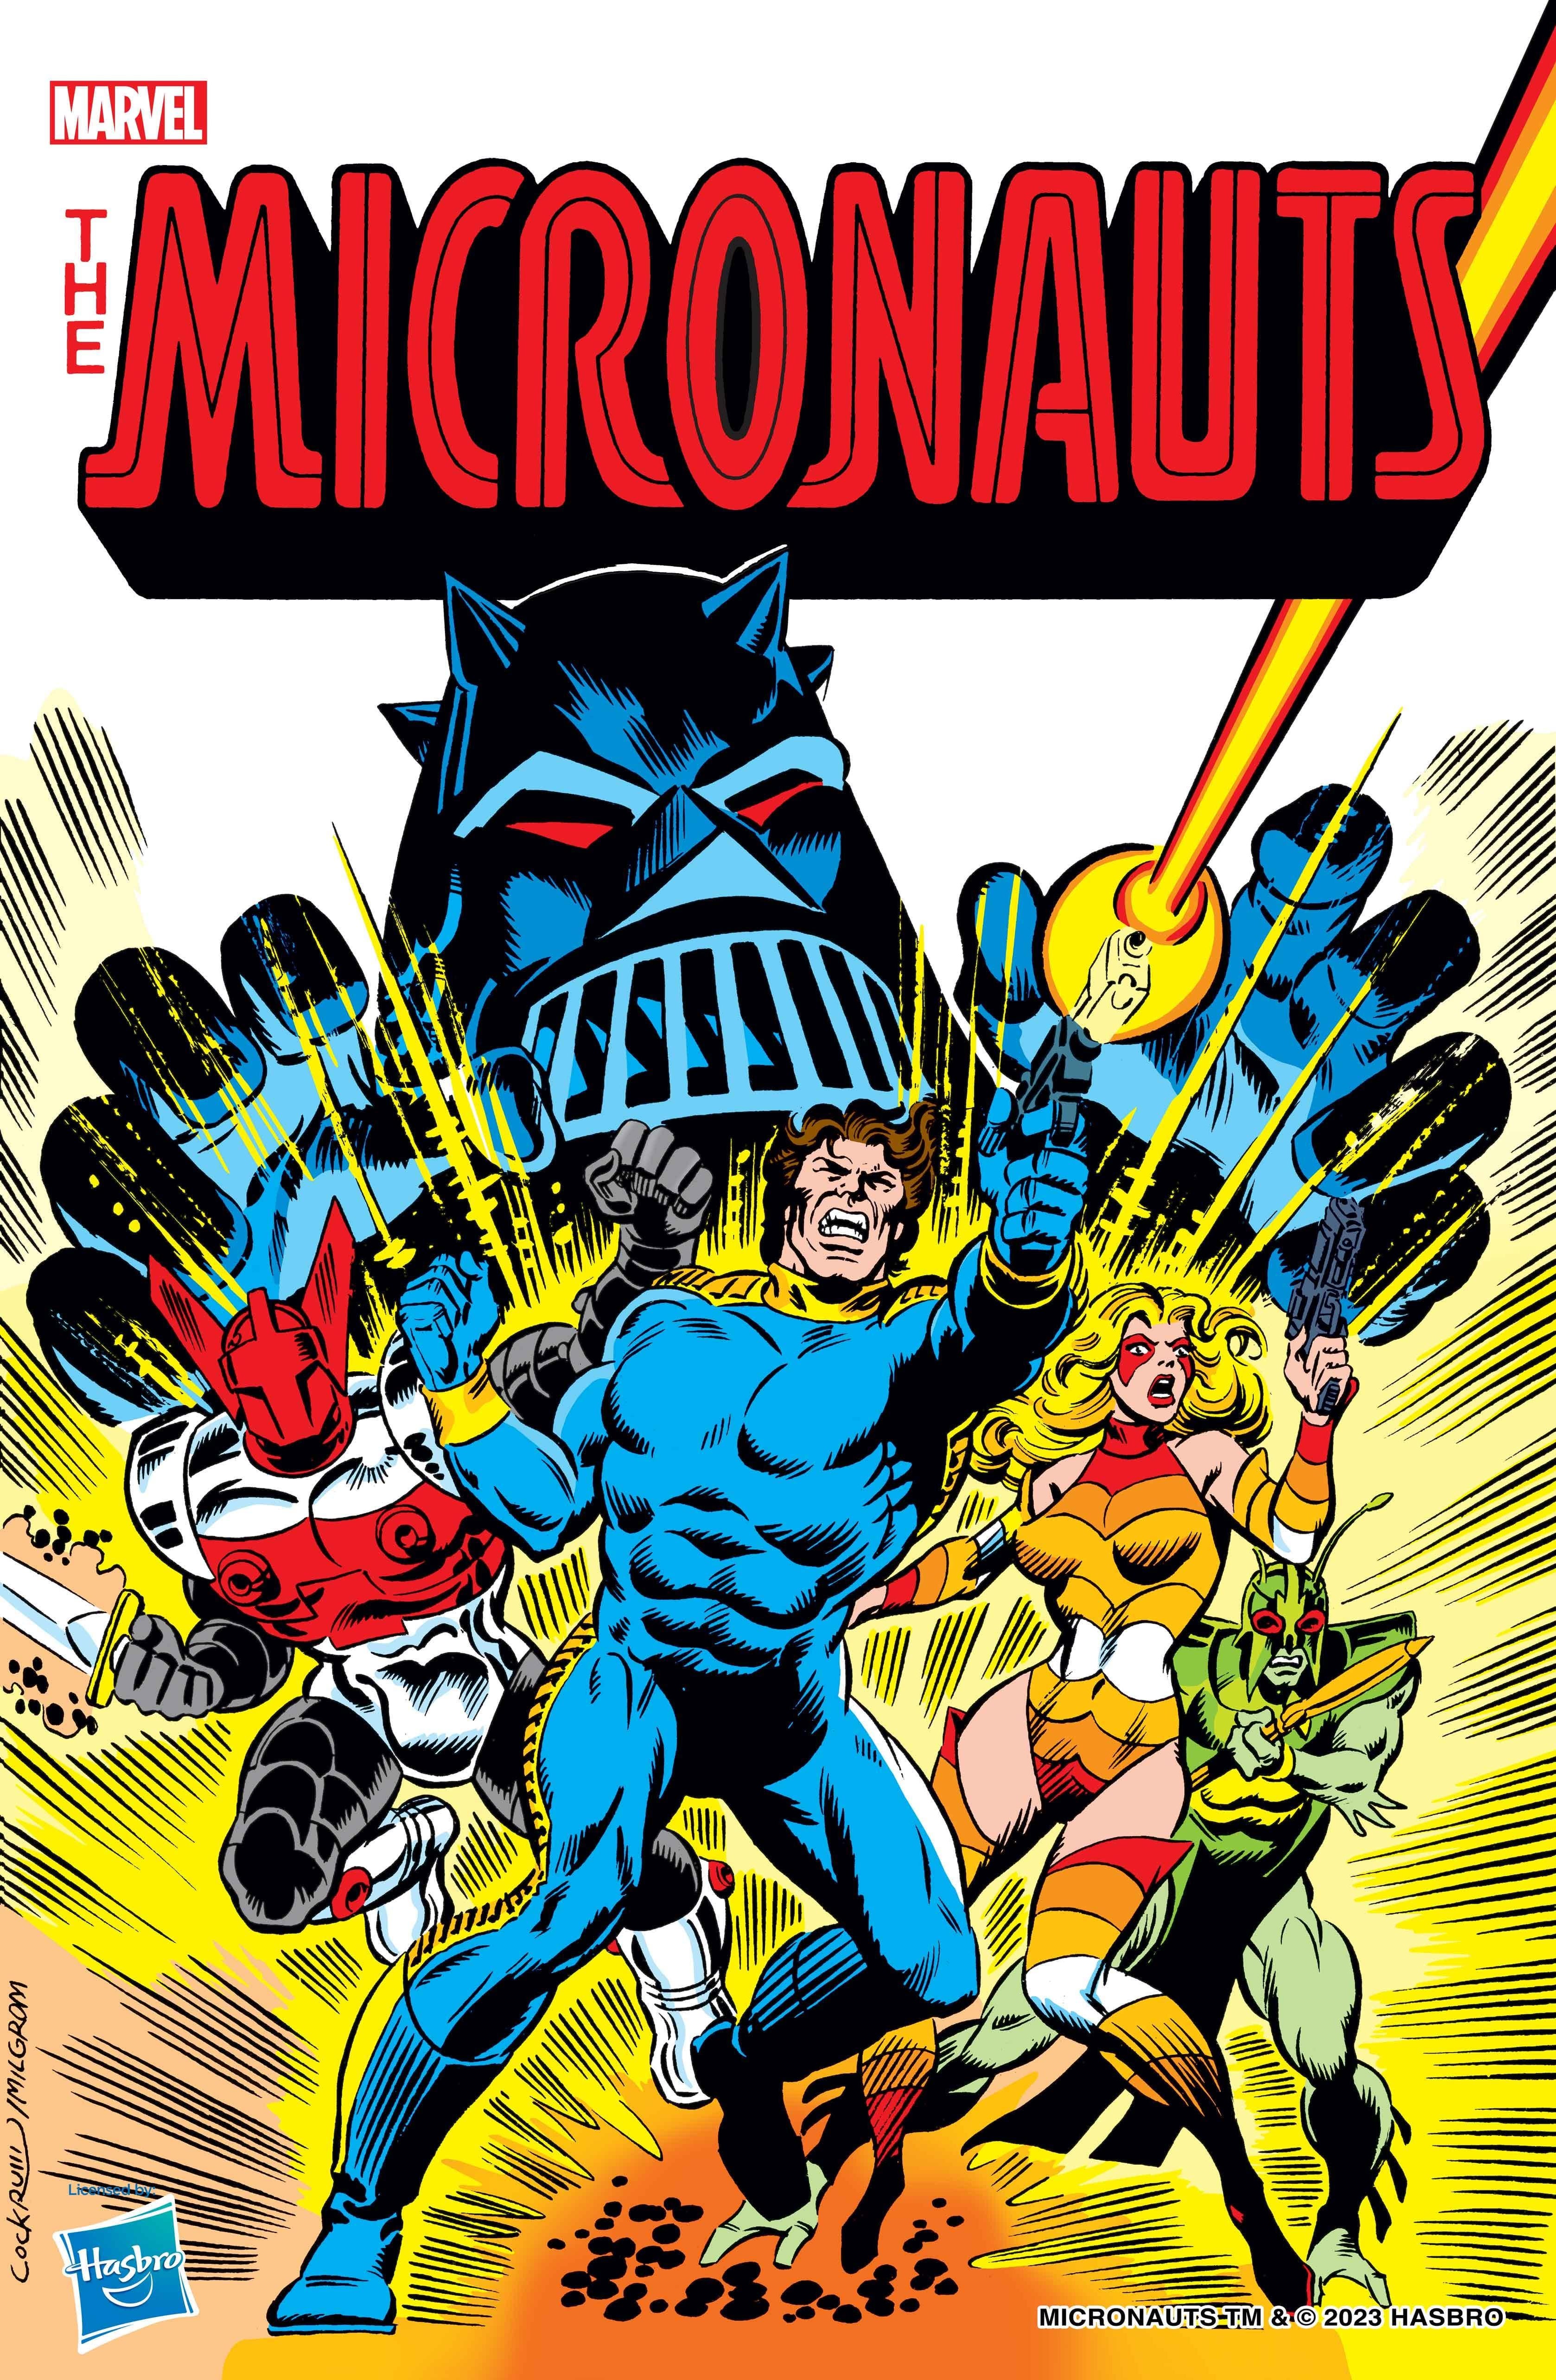 Marvel to Reprint Micronauts For the First Time Ever